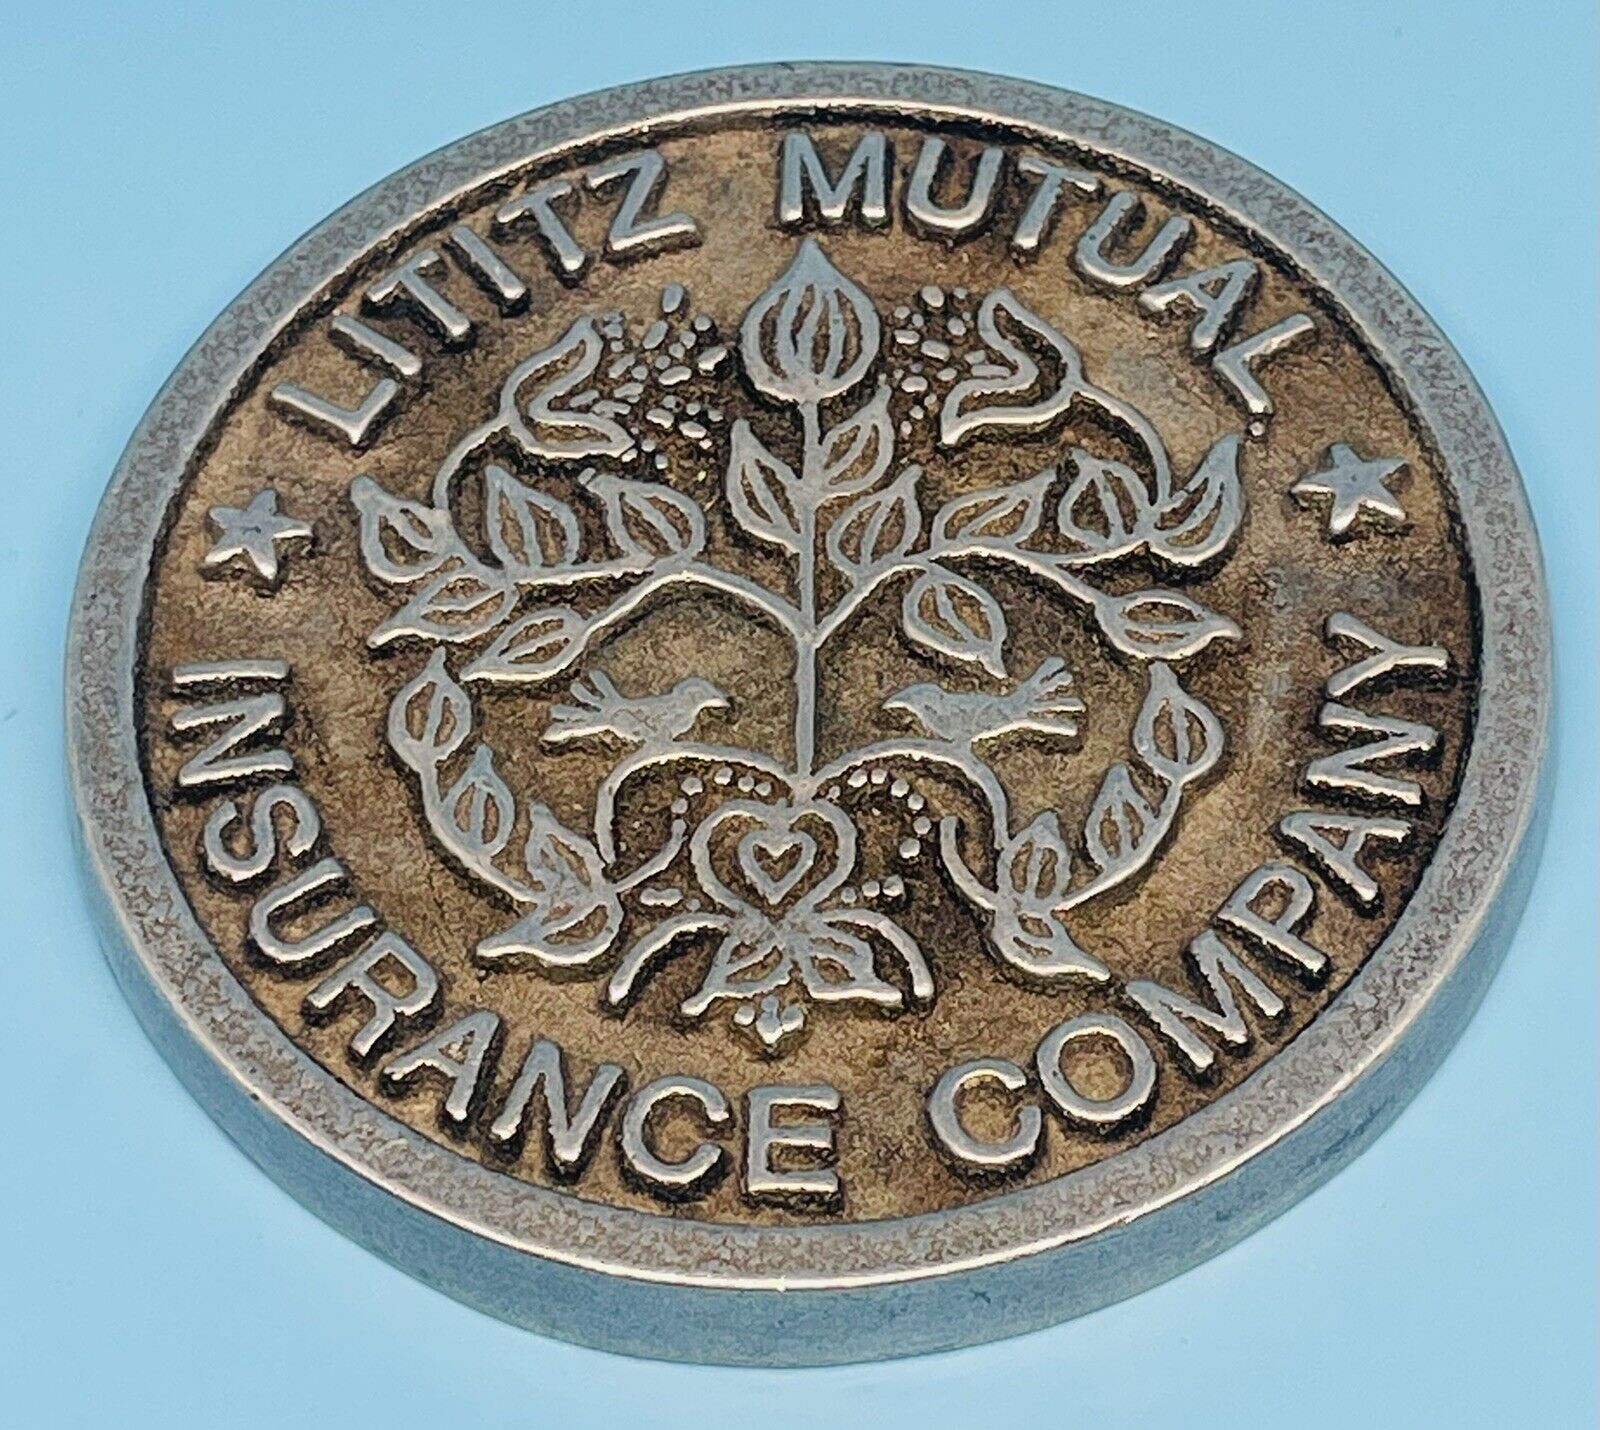 Lititz Mutual Insurance Company Pennsylvania Vintage Paperweight by Wilton